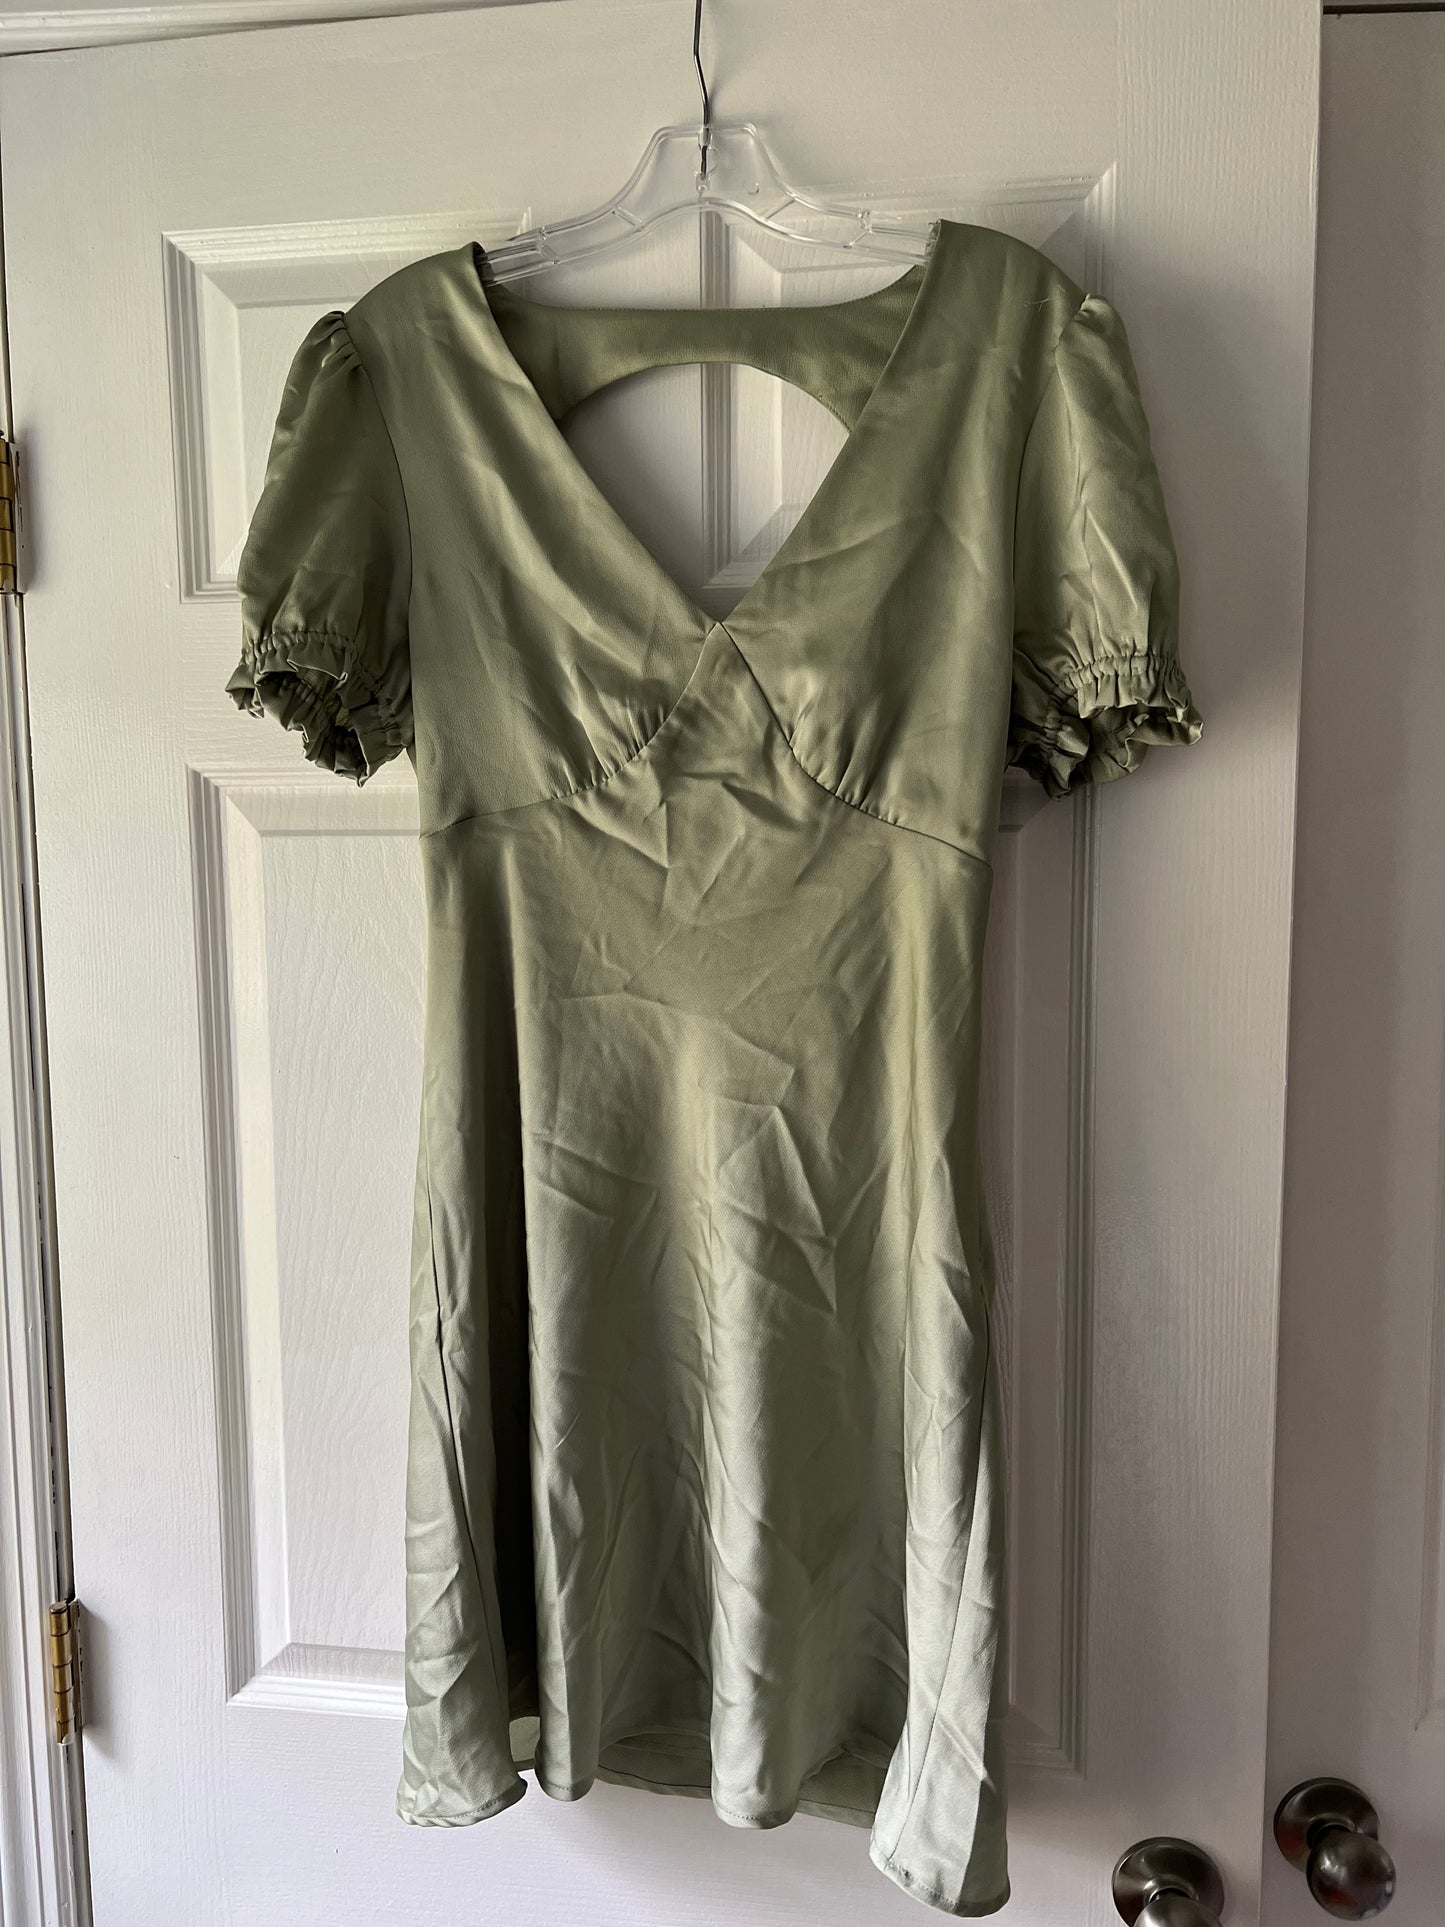 **REDUCED** Altard State Women's Sage Green Satin Dress Size L (fits like a M!)